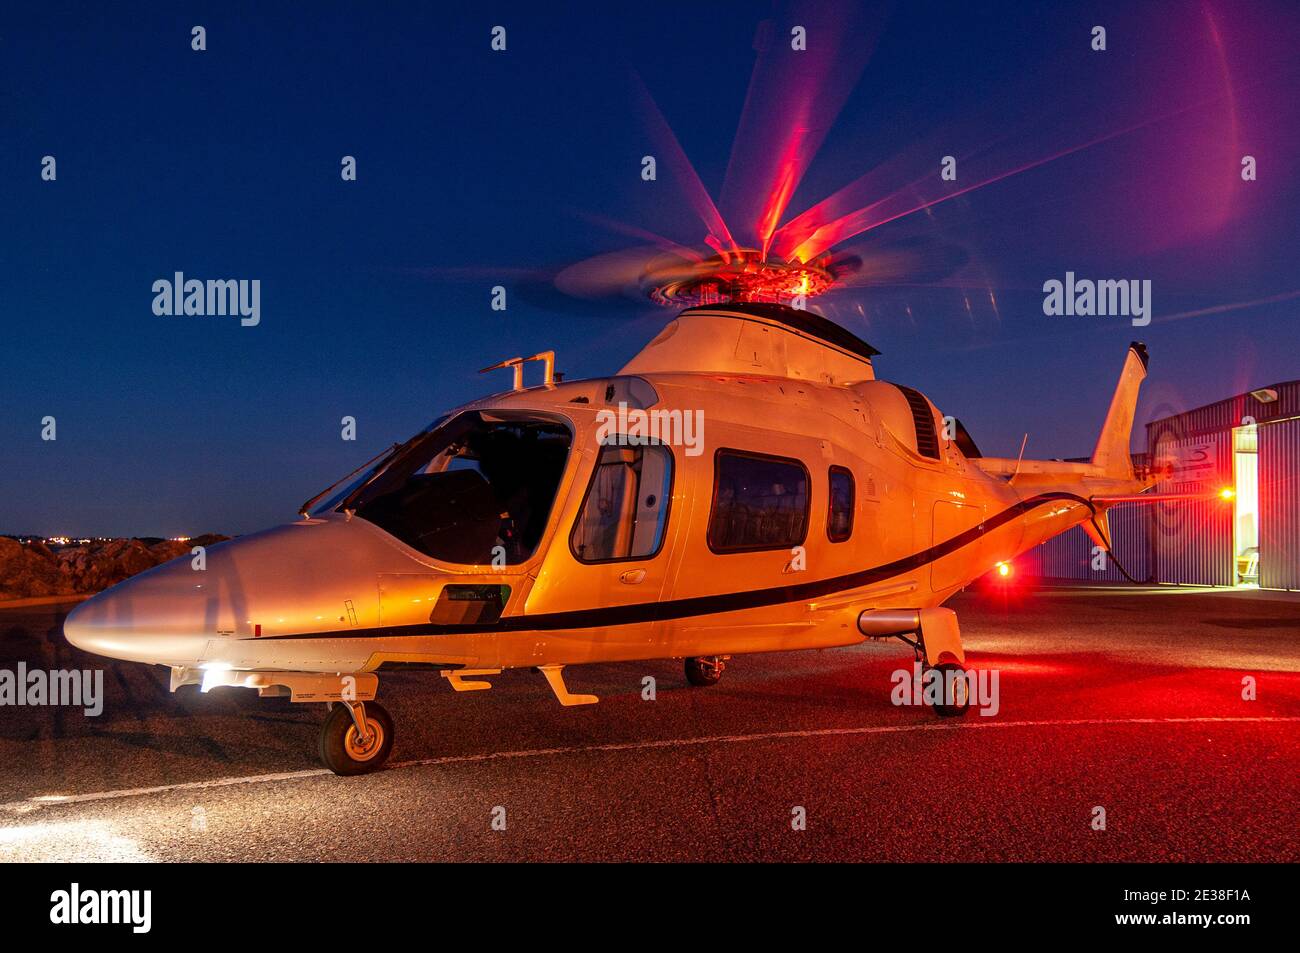 An Agusta 109 Power executive helicopter at sunset. Stock Photo